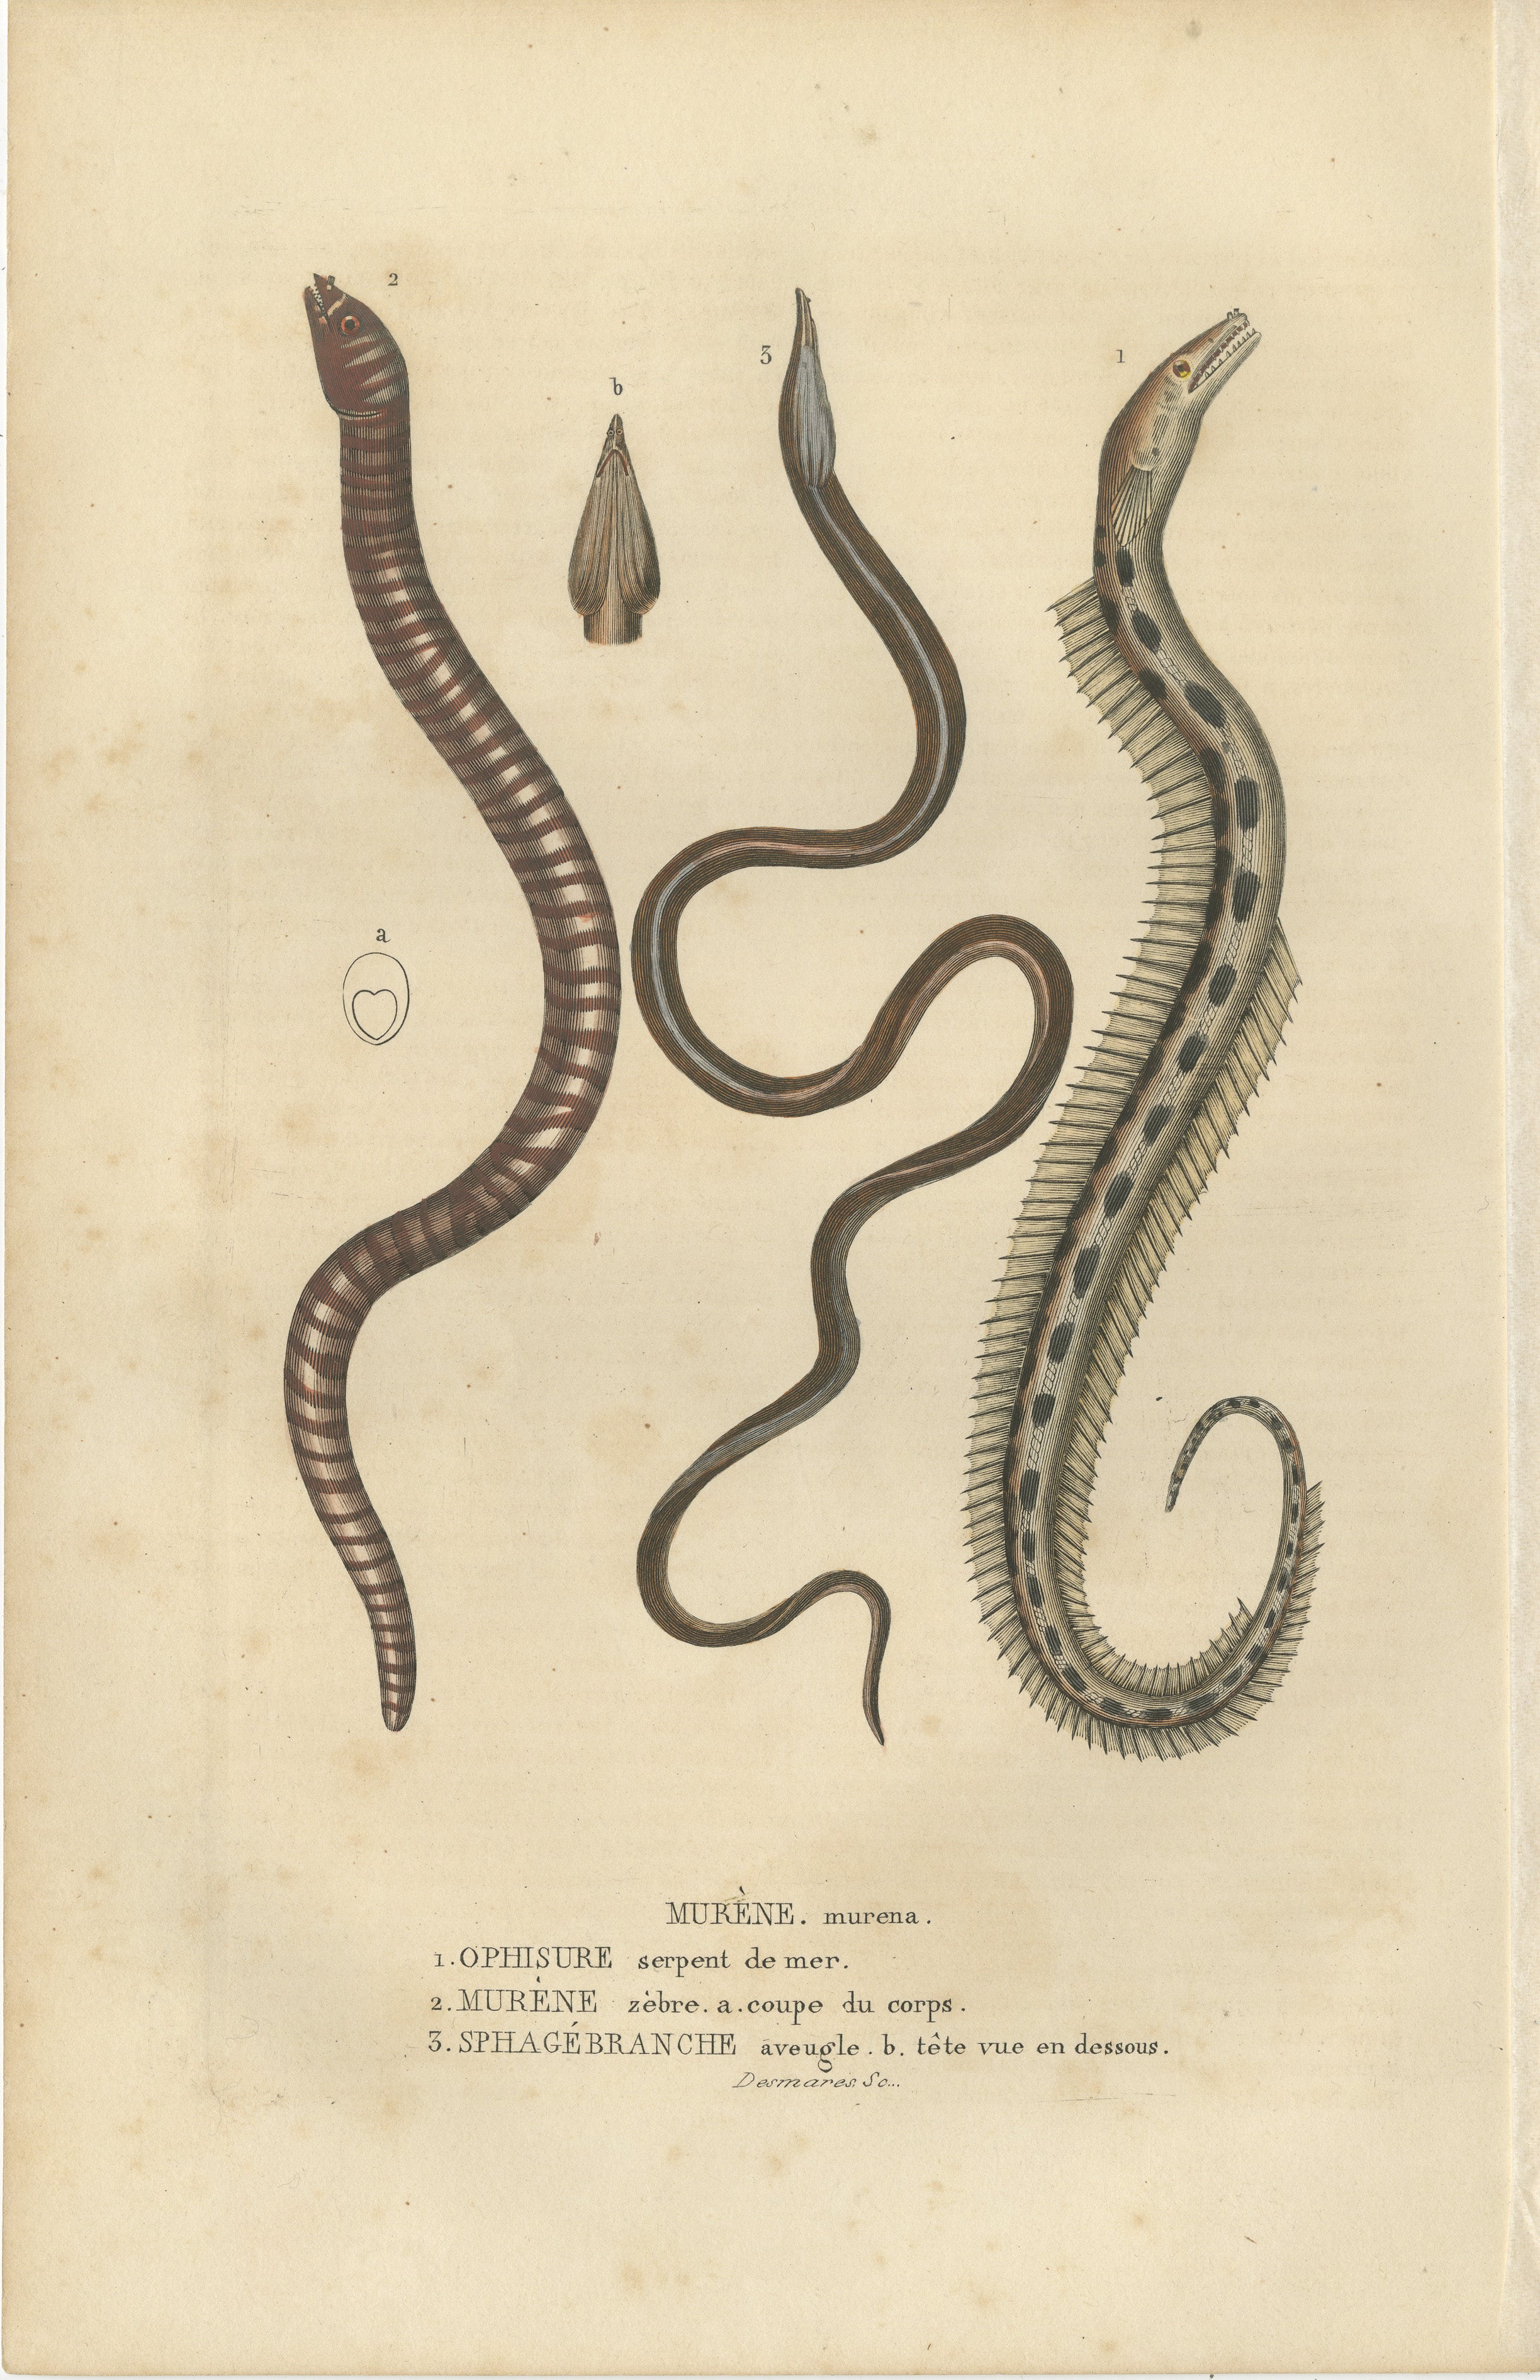 The engraving illustrates three marine creatures:

1. **Ophiure serpent de mer** - This is likely an ophiuroid, commonly known as a brittle star. These are echinoderms, related to starfish, with long, slender arms that are distinct from the central